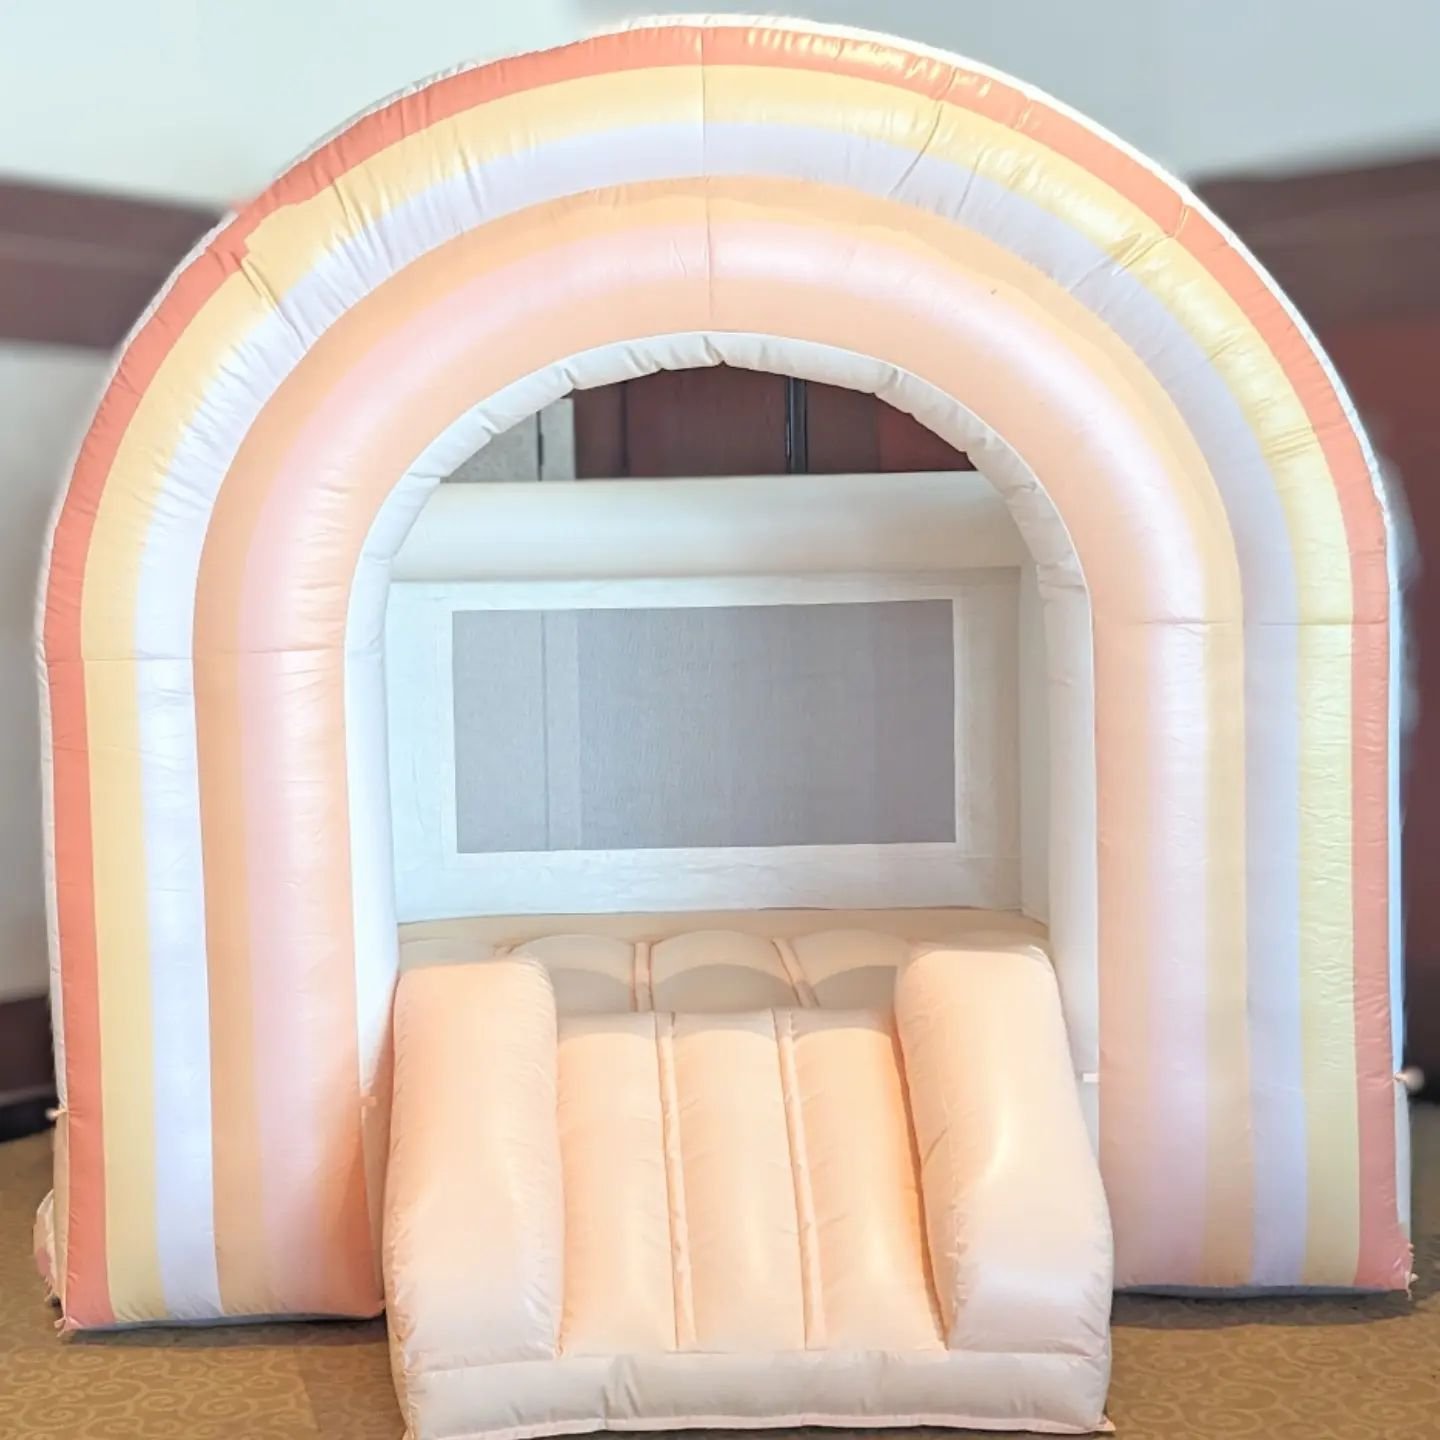 Indoor and outdoor! Our peach rainbow is going to be popular this summer! Reserve your date at www.modbouncehouse.com 

#rainbow #rainbowbirthday #rainbowparty #bouncehouse #kidsparty #chicagobouncehouse